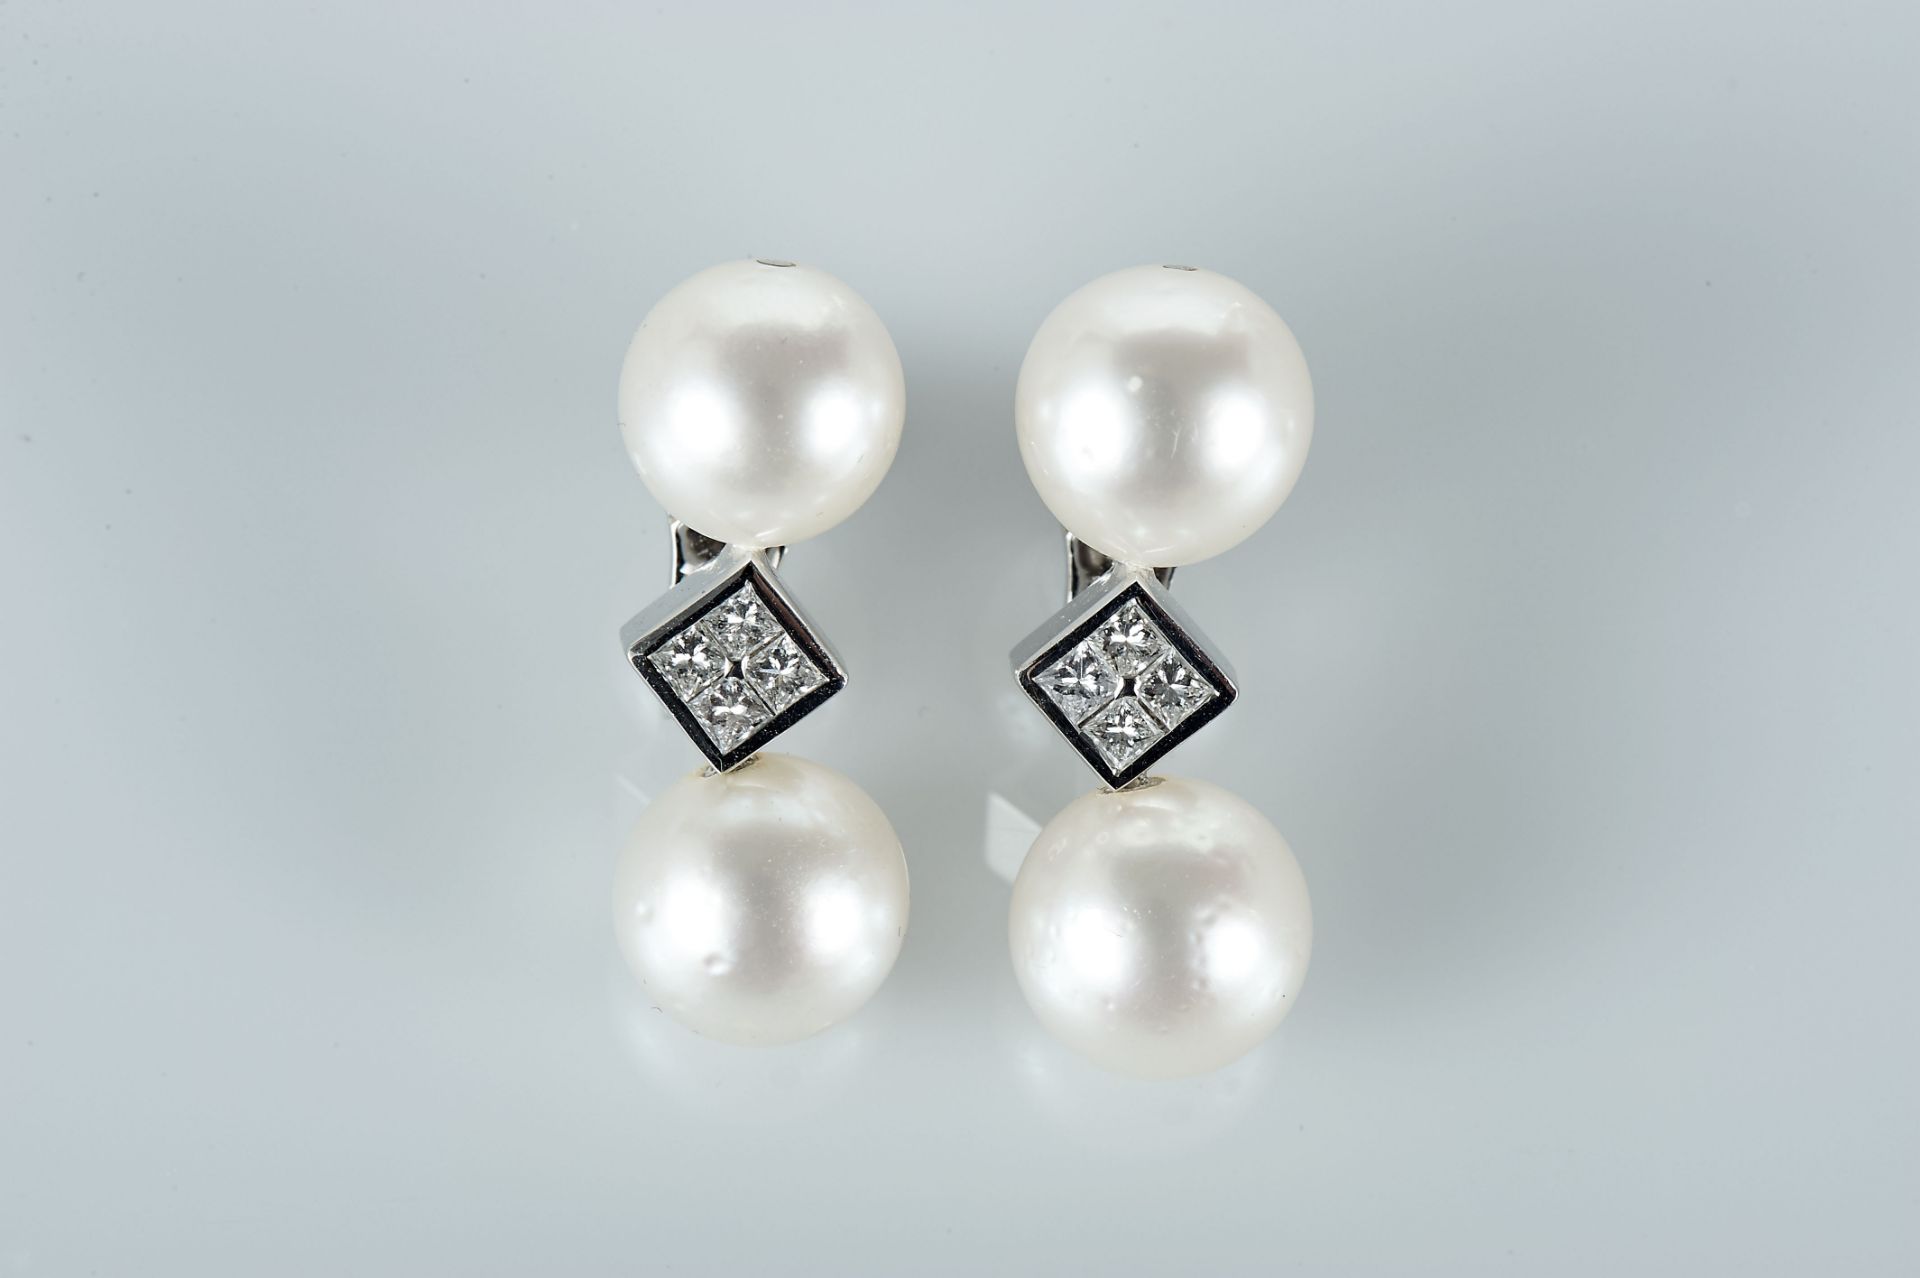 A Pair of Earrings, 800/1000 gold, set with 4 pearls of the South Seas (10.5 mm) and 8 princess